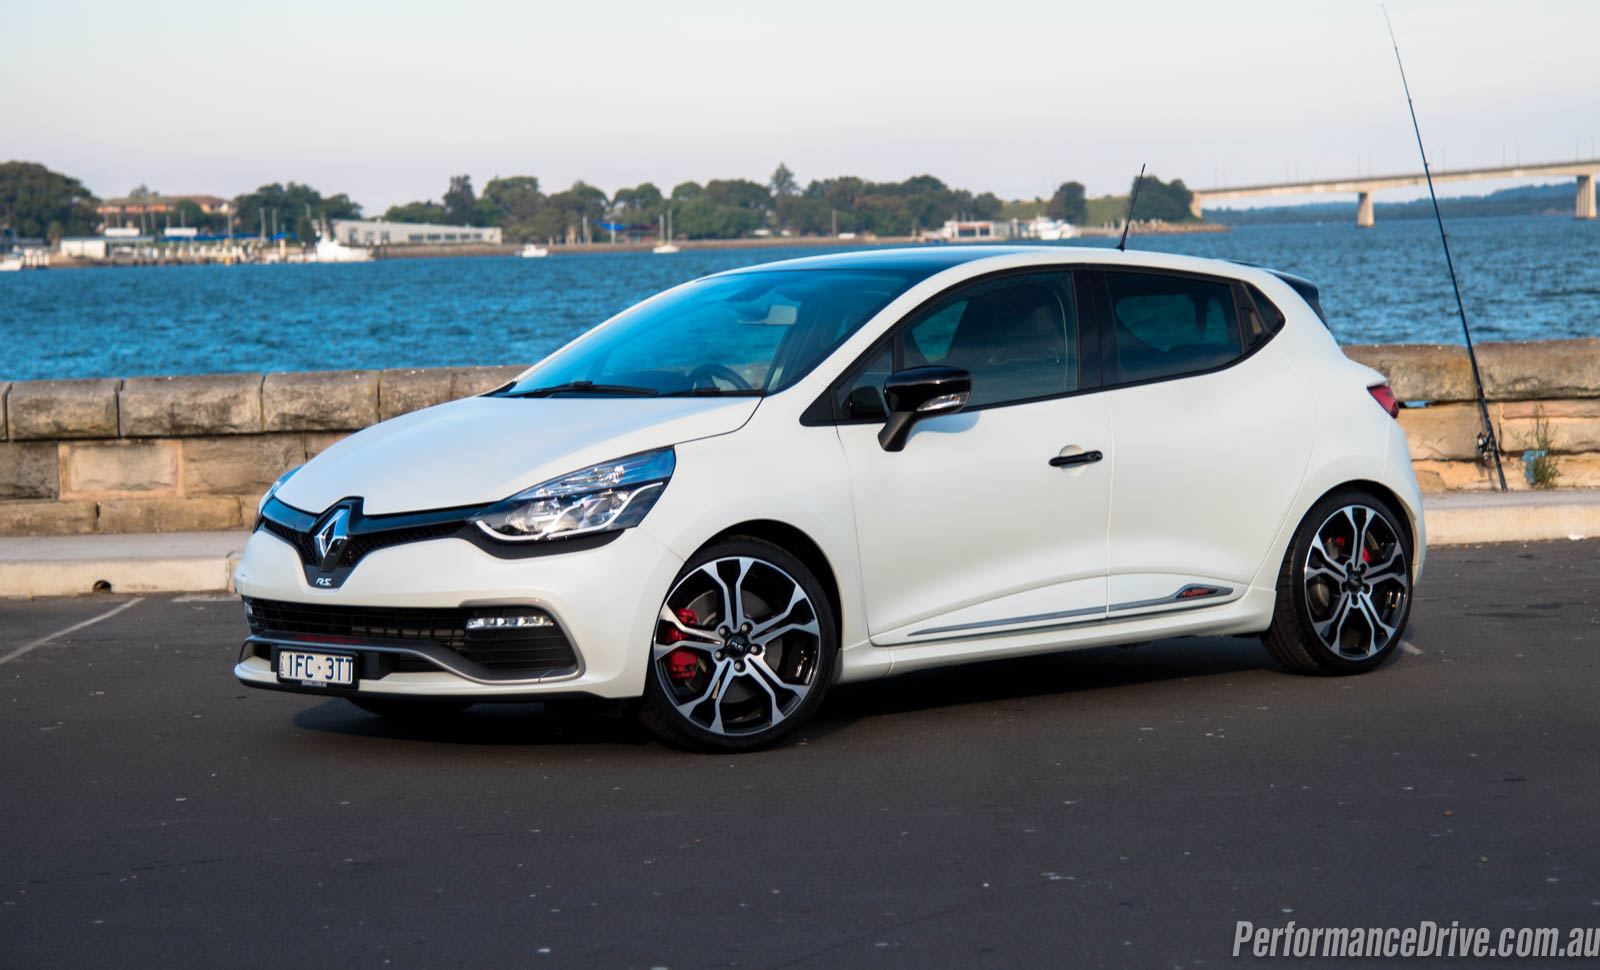 Renault Clio R.S. 220 review (video) - PerformanceDrive